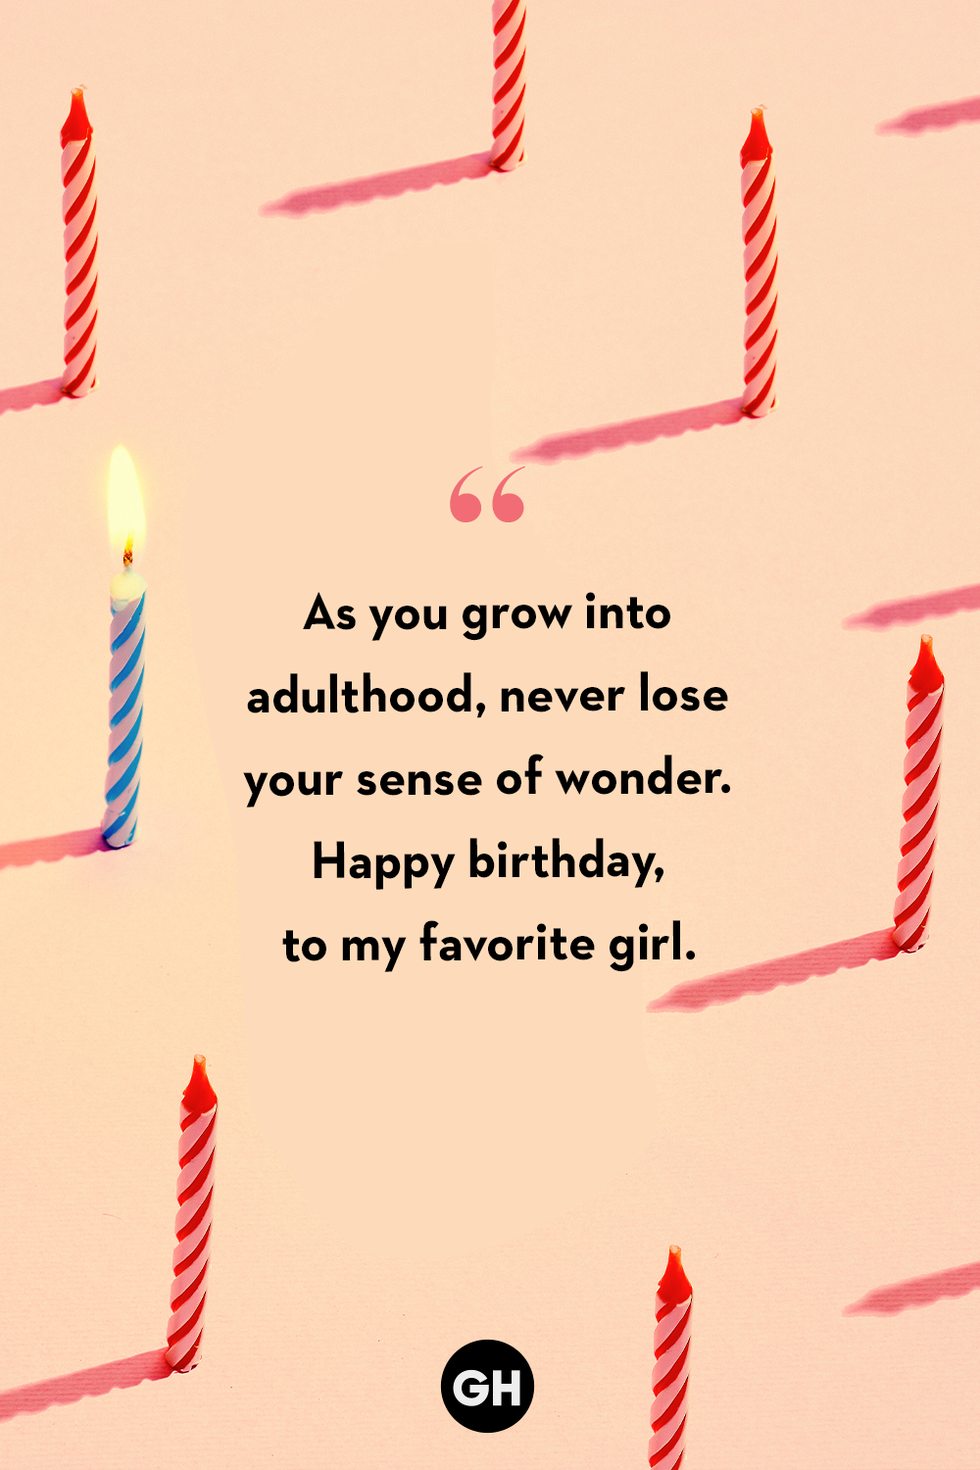 Happy Birthday Images with Wishes, Happy Bday Pictures  Birthday wishes  girl, Happy birthday girl quotes, Birthday girl quotes